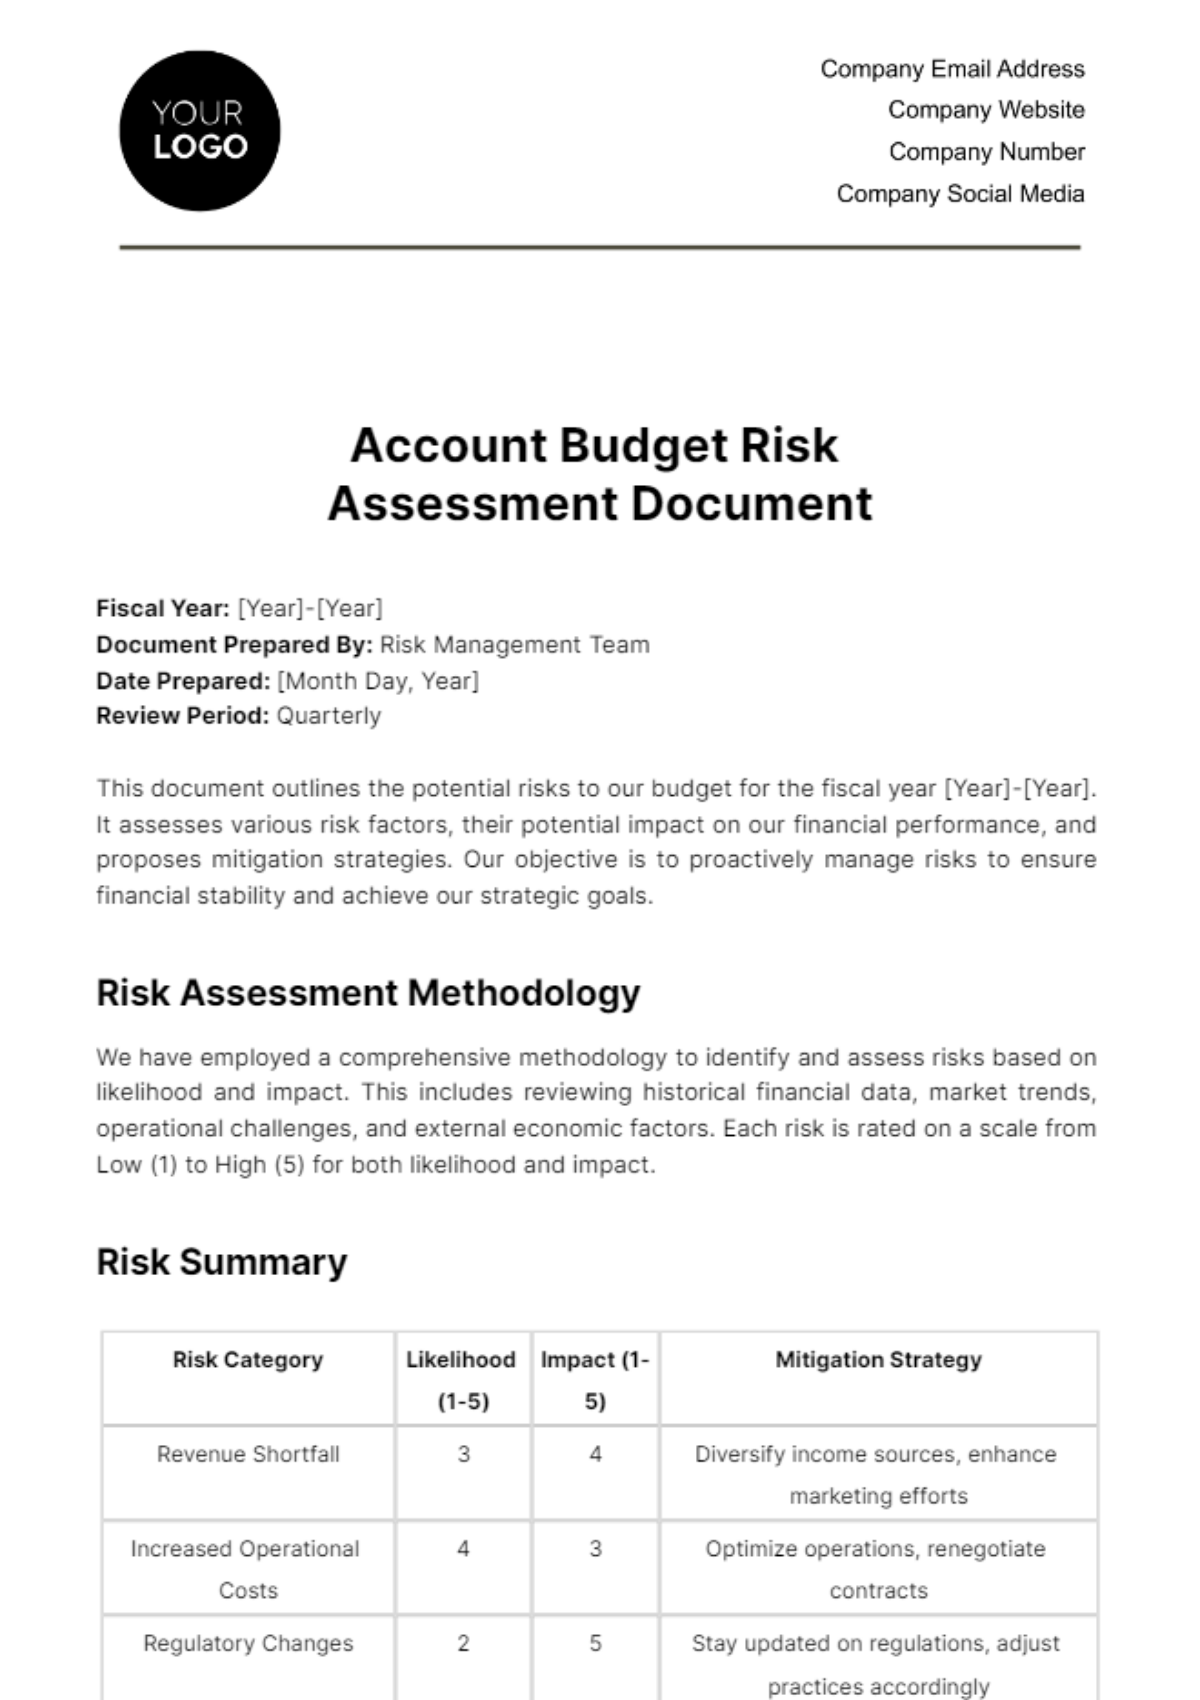 Free Account Budget Risk Assessment Document Template